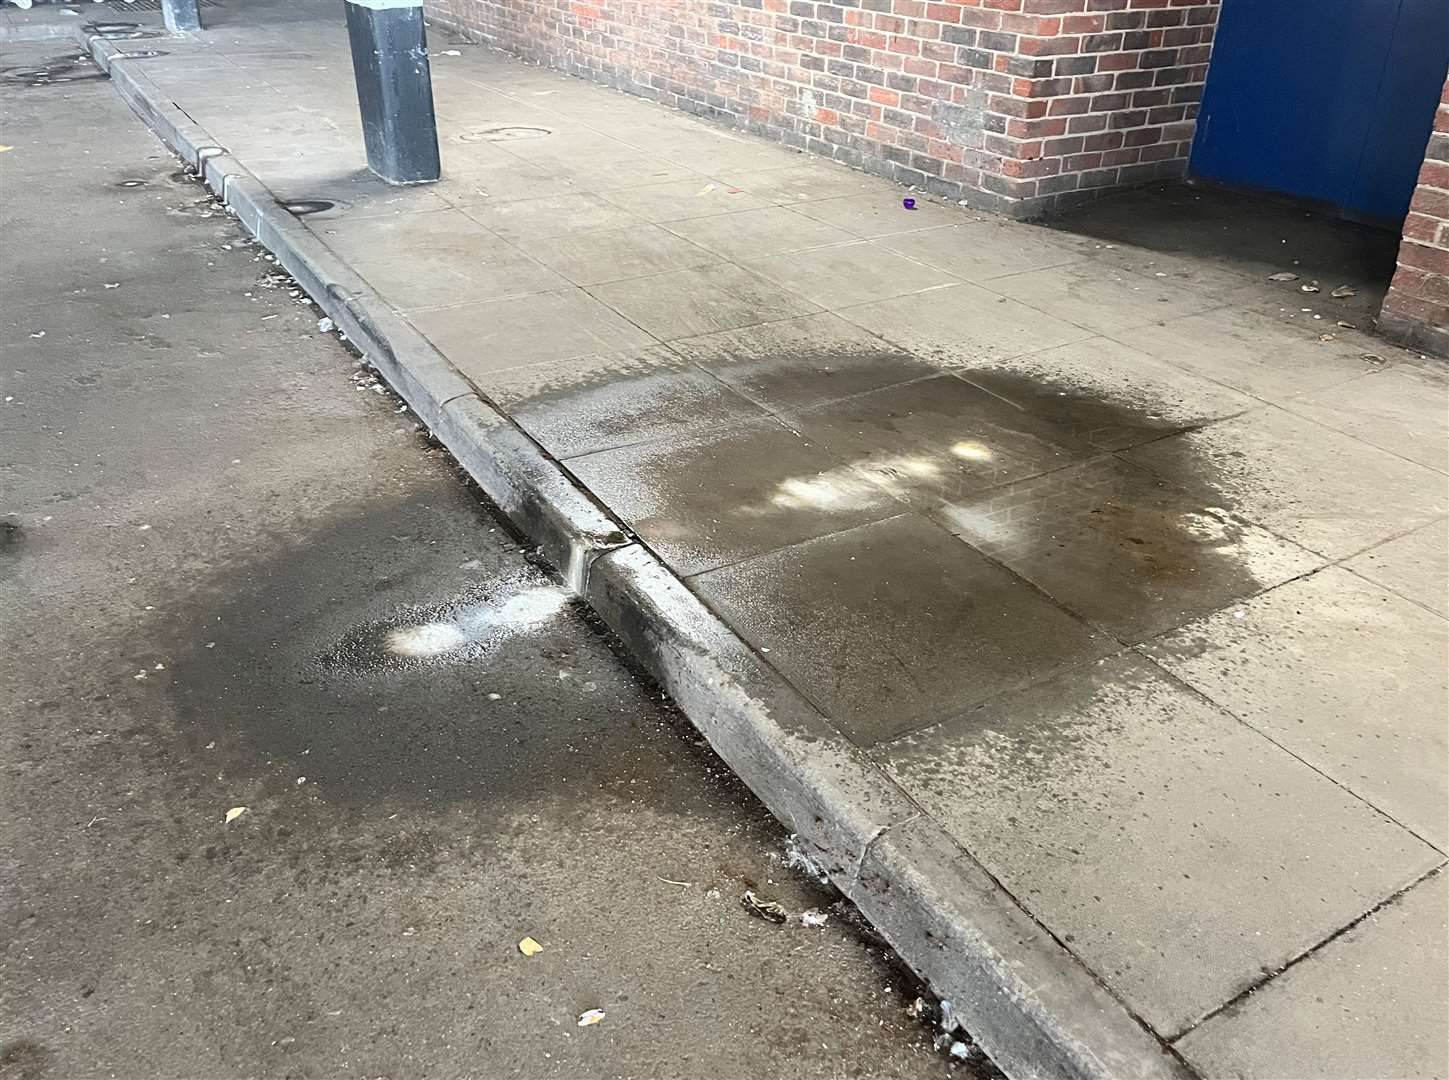 There are lots of wet patches on the floor of the car park